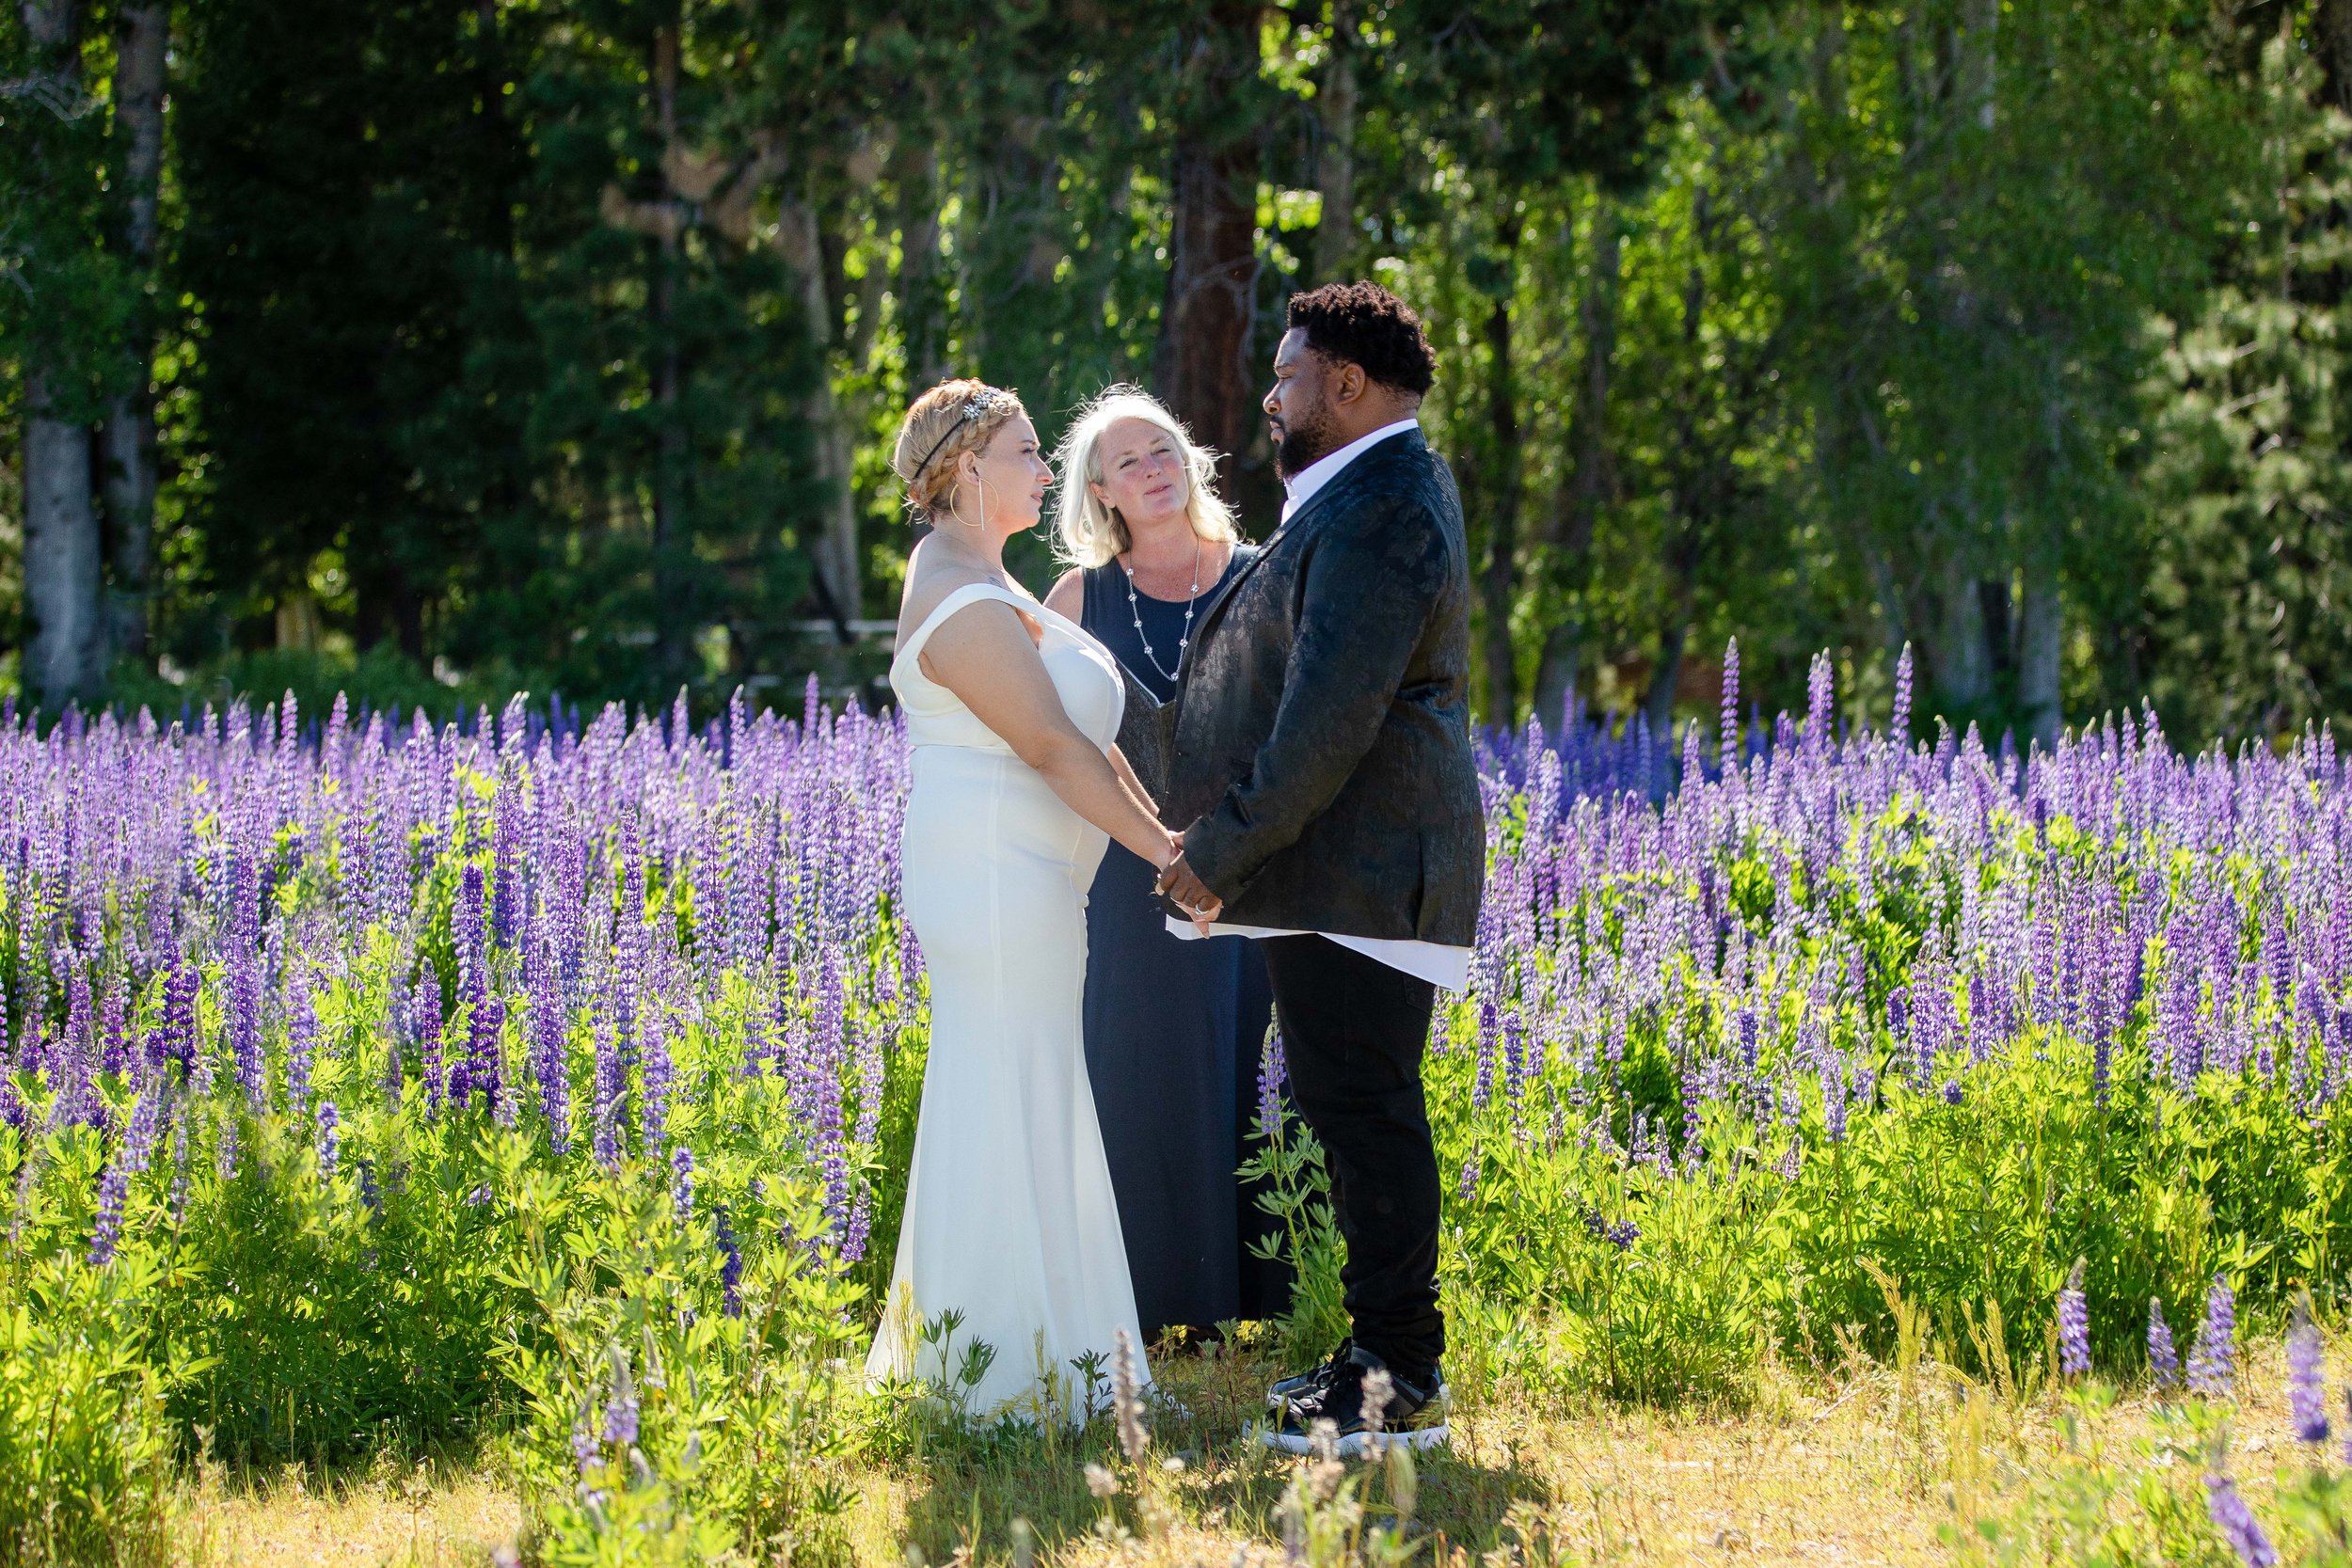 Couple during their wedding ceremony in a lupine field